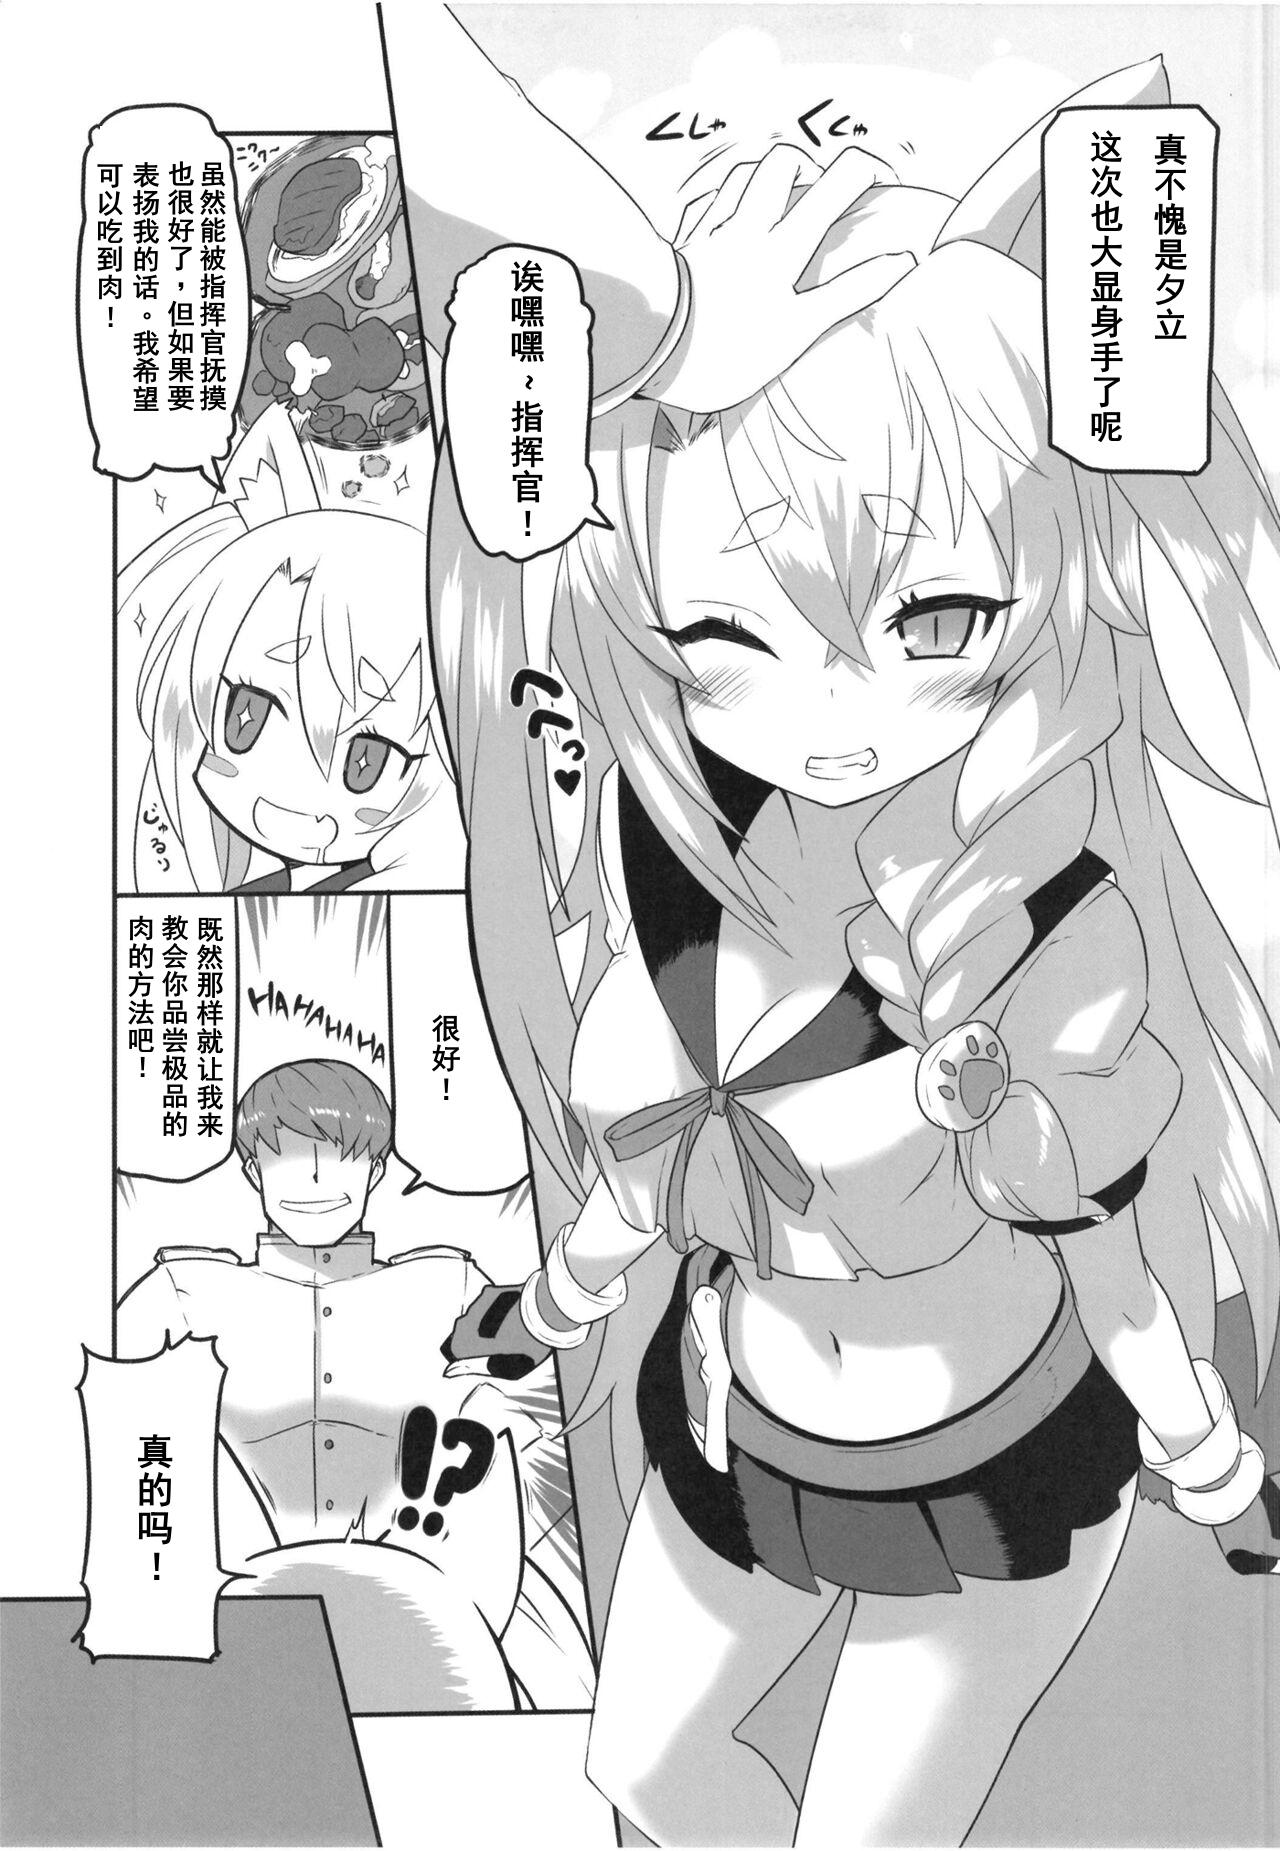 Blows Yuudachi to Oishii Oniku - Yudachi and delicious meat - Azur lane 4some - Page 4